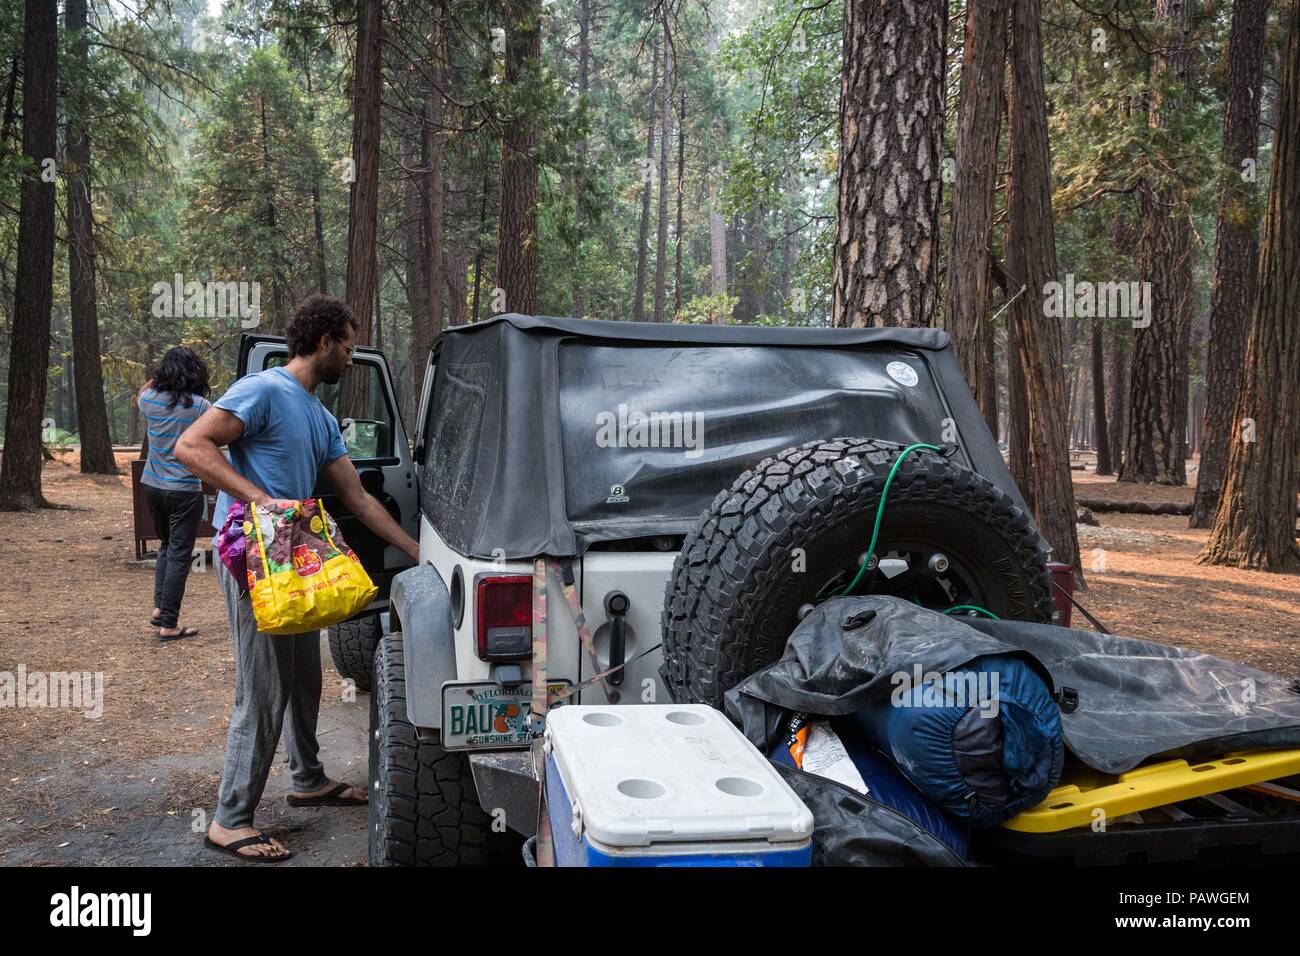 July 25, 2018 - Yosemite National Park, California, U.S - HAKIM GENTA-CLINTON, from Florida, places one of the final bags into his car as he and his friends are the last campers to depart the Upper Pines Campground in Yosemite National Park. Clinton and his two friends arrived to the park last night at 10:30pm and awoke to the news they had to leave their campsite by noon. Yosemite Valley closed to visitors at 12:00 noon Wednesday due to air quality and safety concerns with a wildfire burning near the park. Because of The Ferguson Fire, officials closed Highway 140, one of the main arteries in Stock Photo